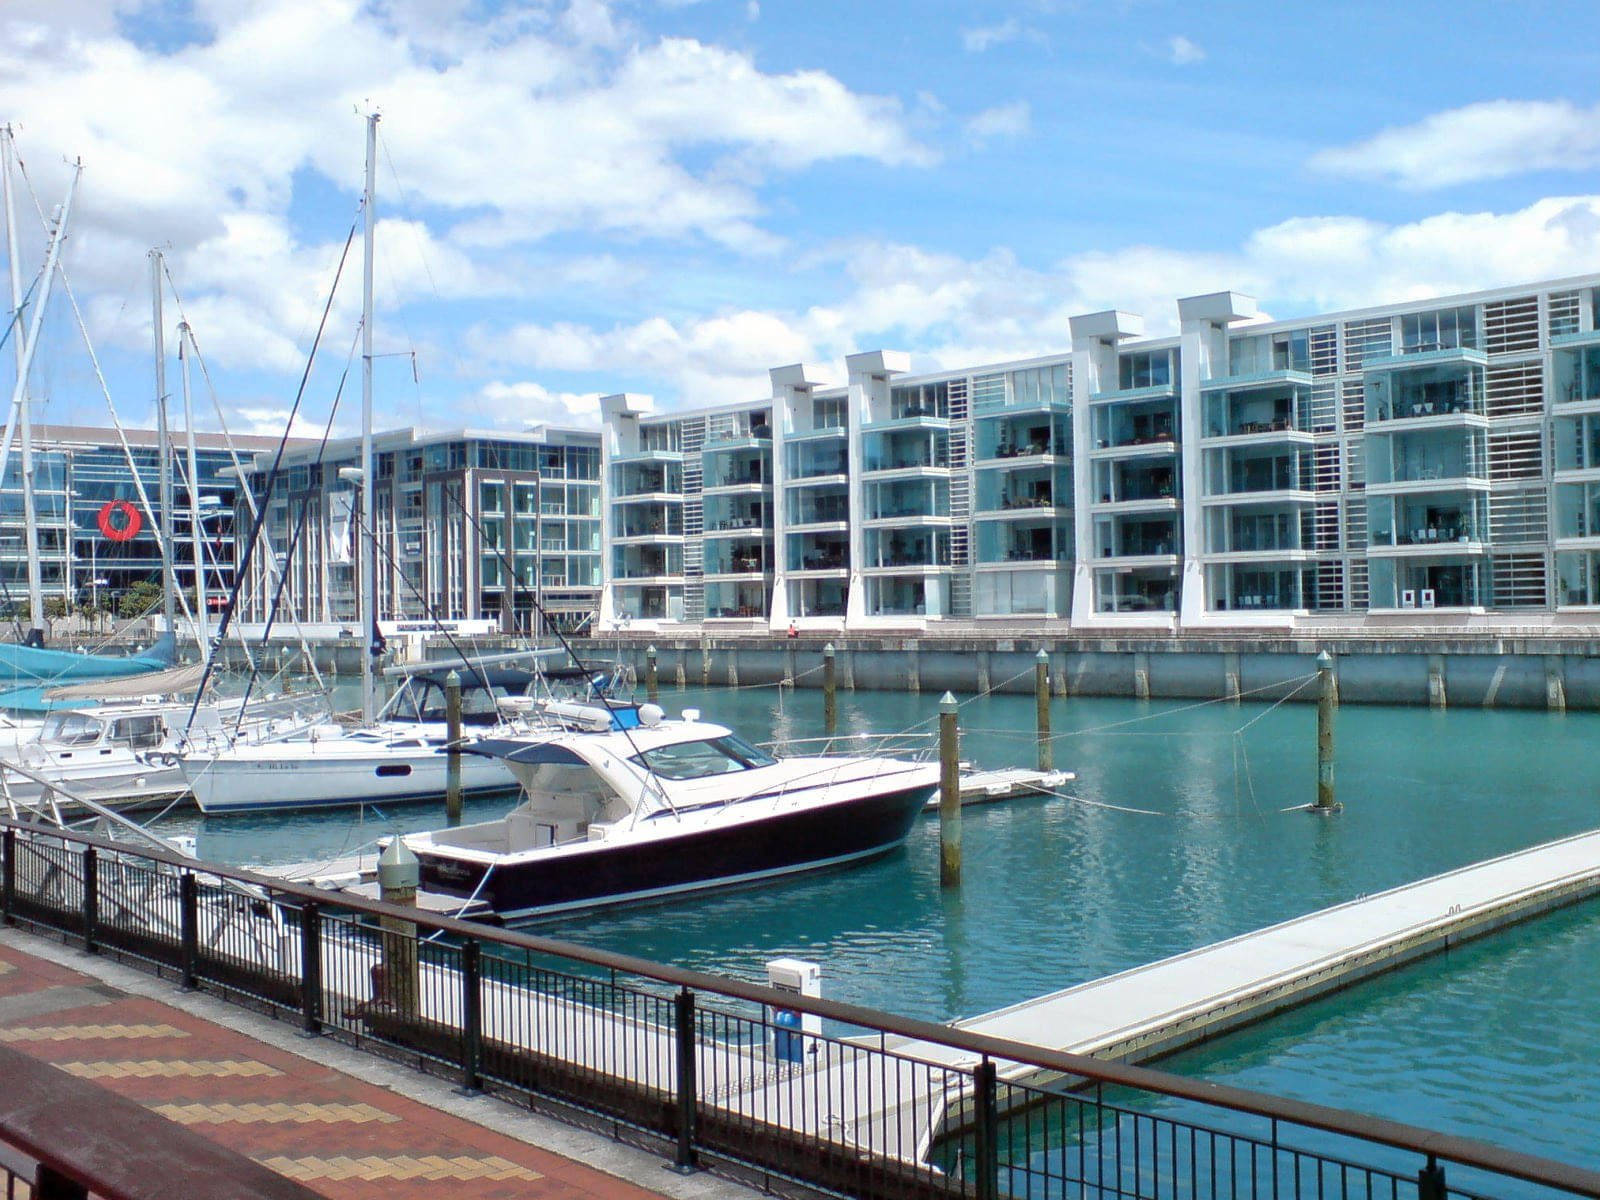 Viaduct Harbour Overview